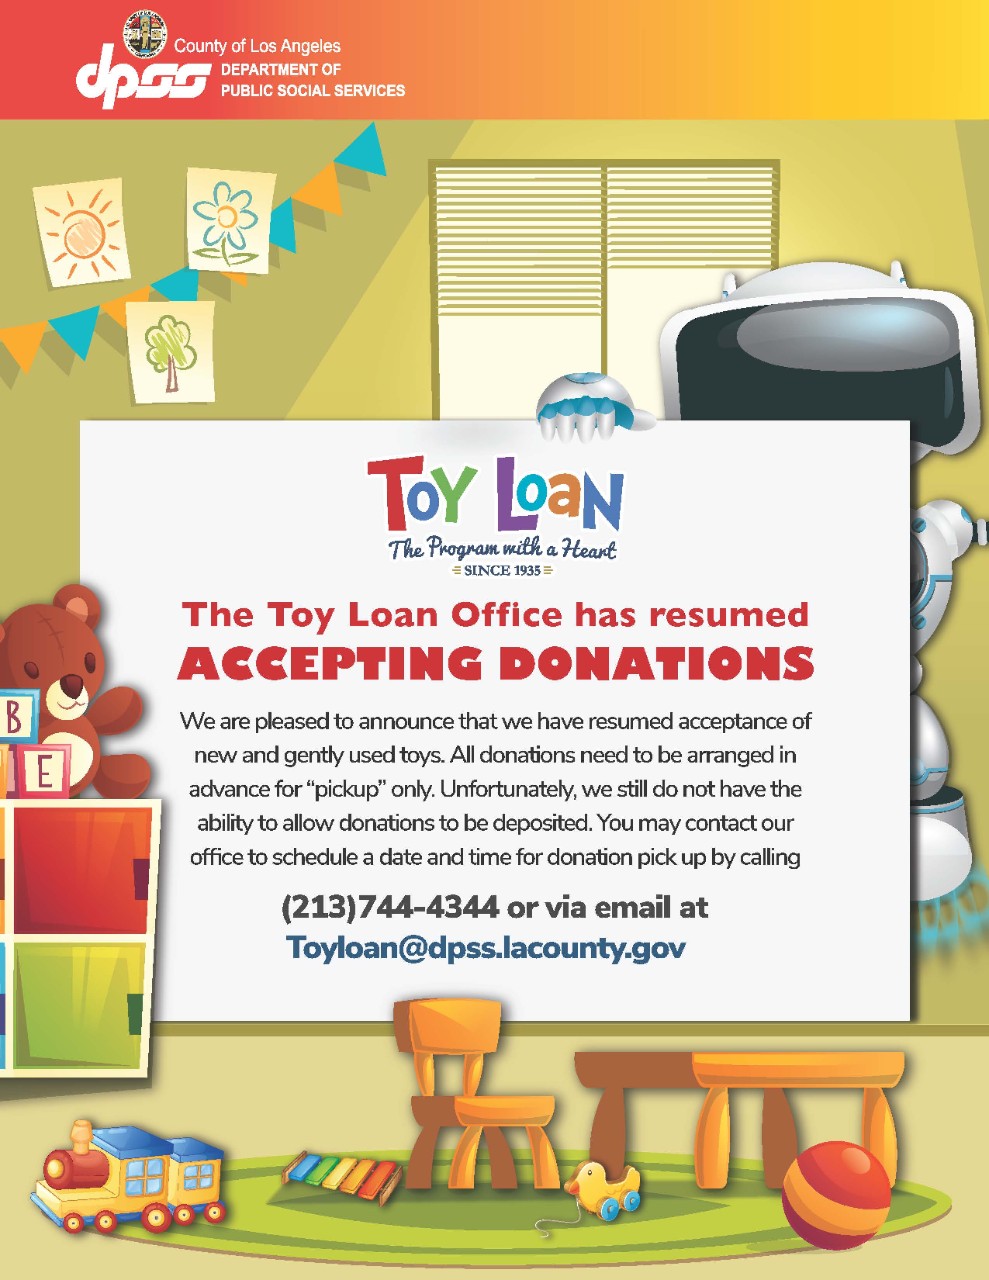 The Toy Loan Office has resumed donation drop-offs and pick-ups for both new and used toys and books are currently paused due to a recent building fire. If you would like to be notified when operations resume, please call (213)744-4344 or email Toyloan@dpss.lacounty.gov to be added to our notification list. 